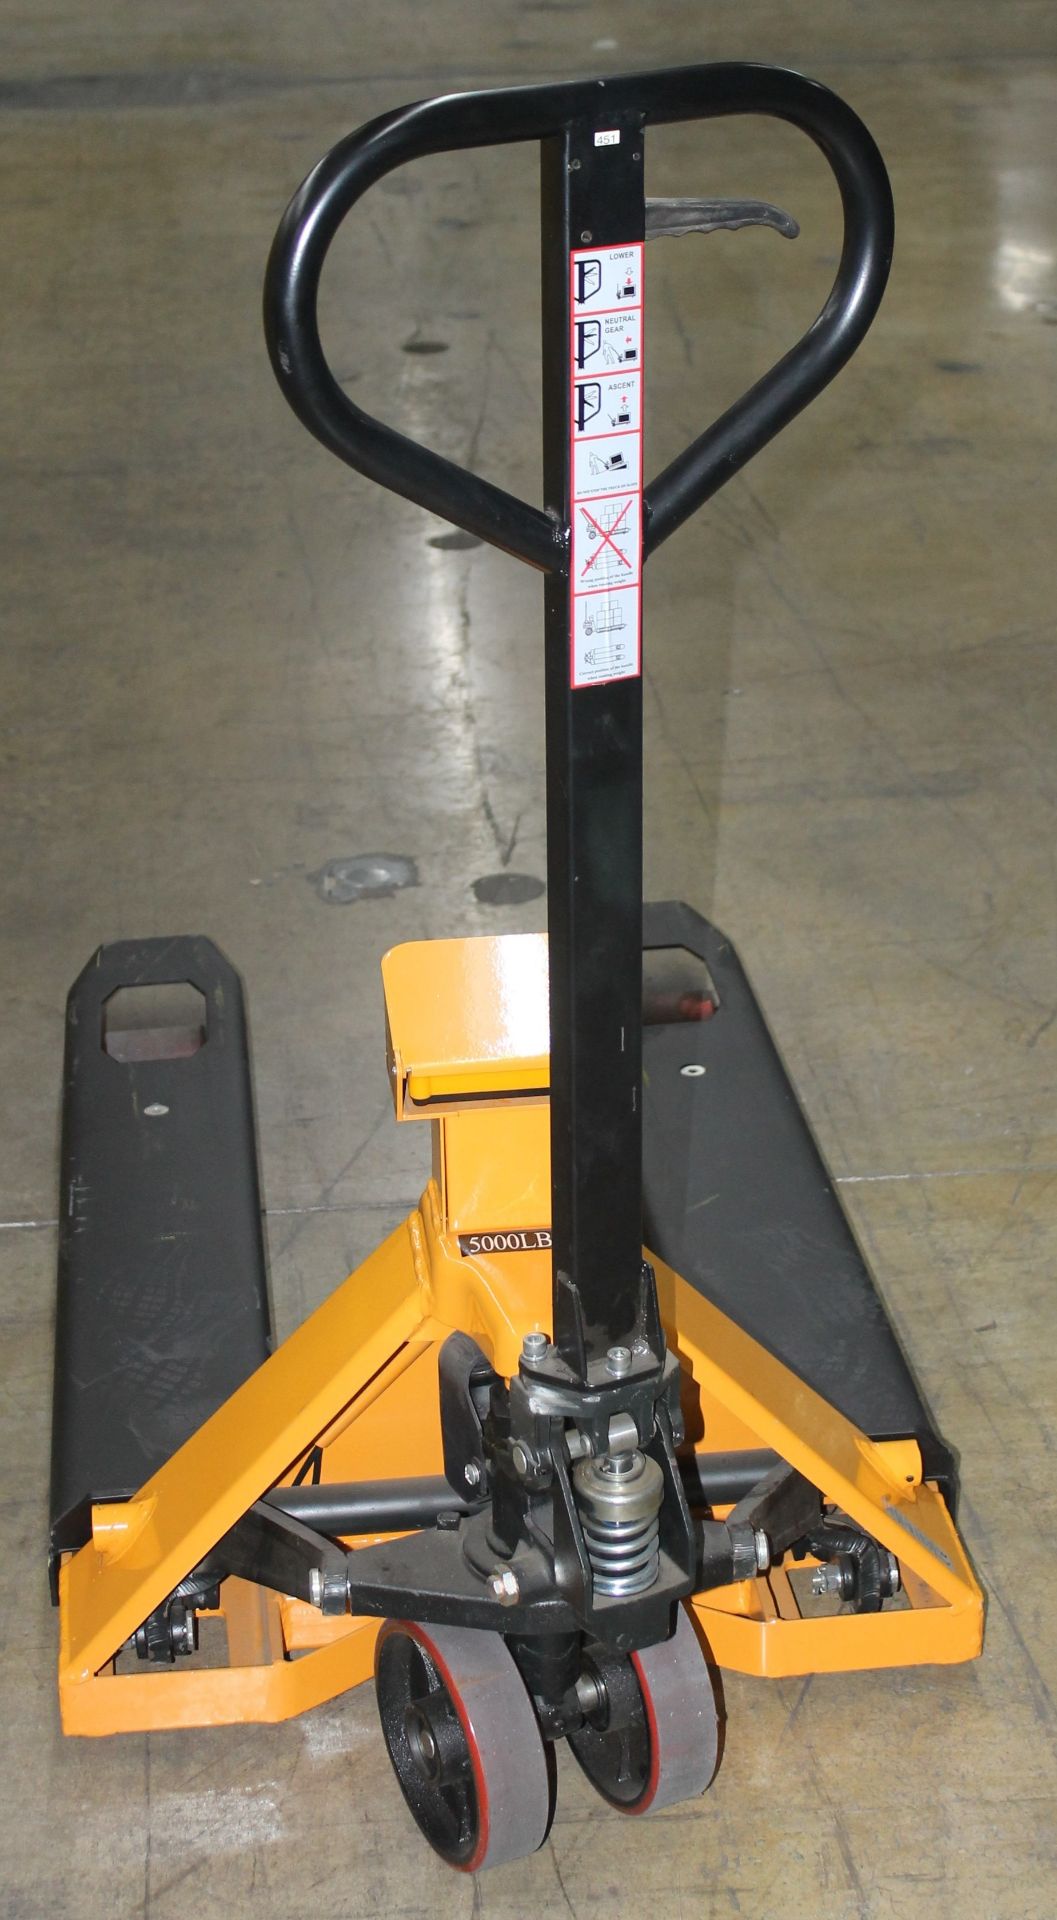 27"W X 48"L PALLET JACK WITH SCALE 5000LBS CAPACITY